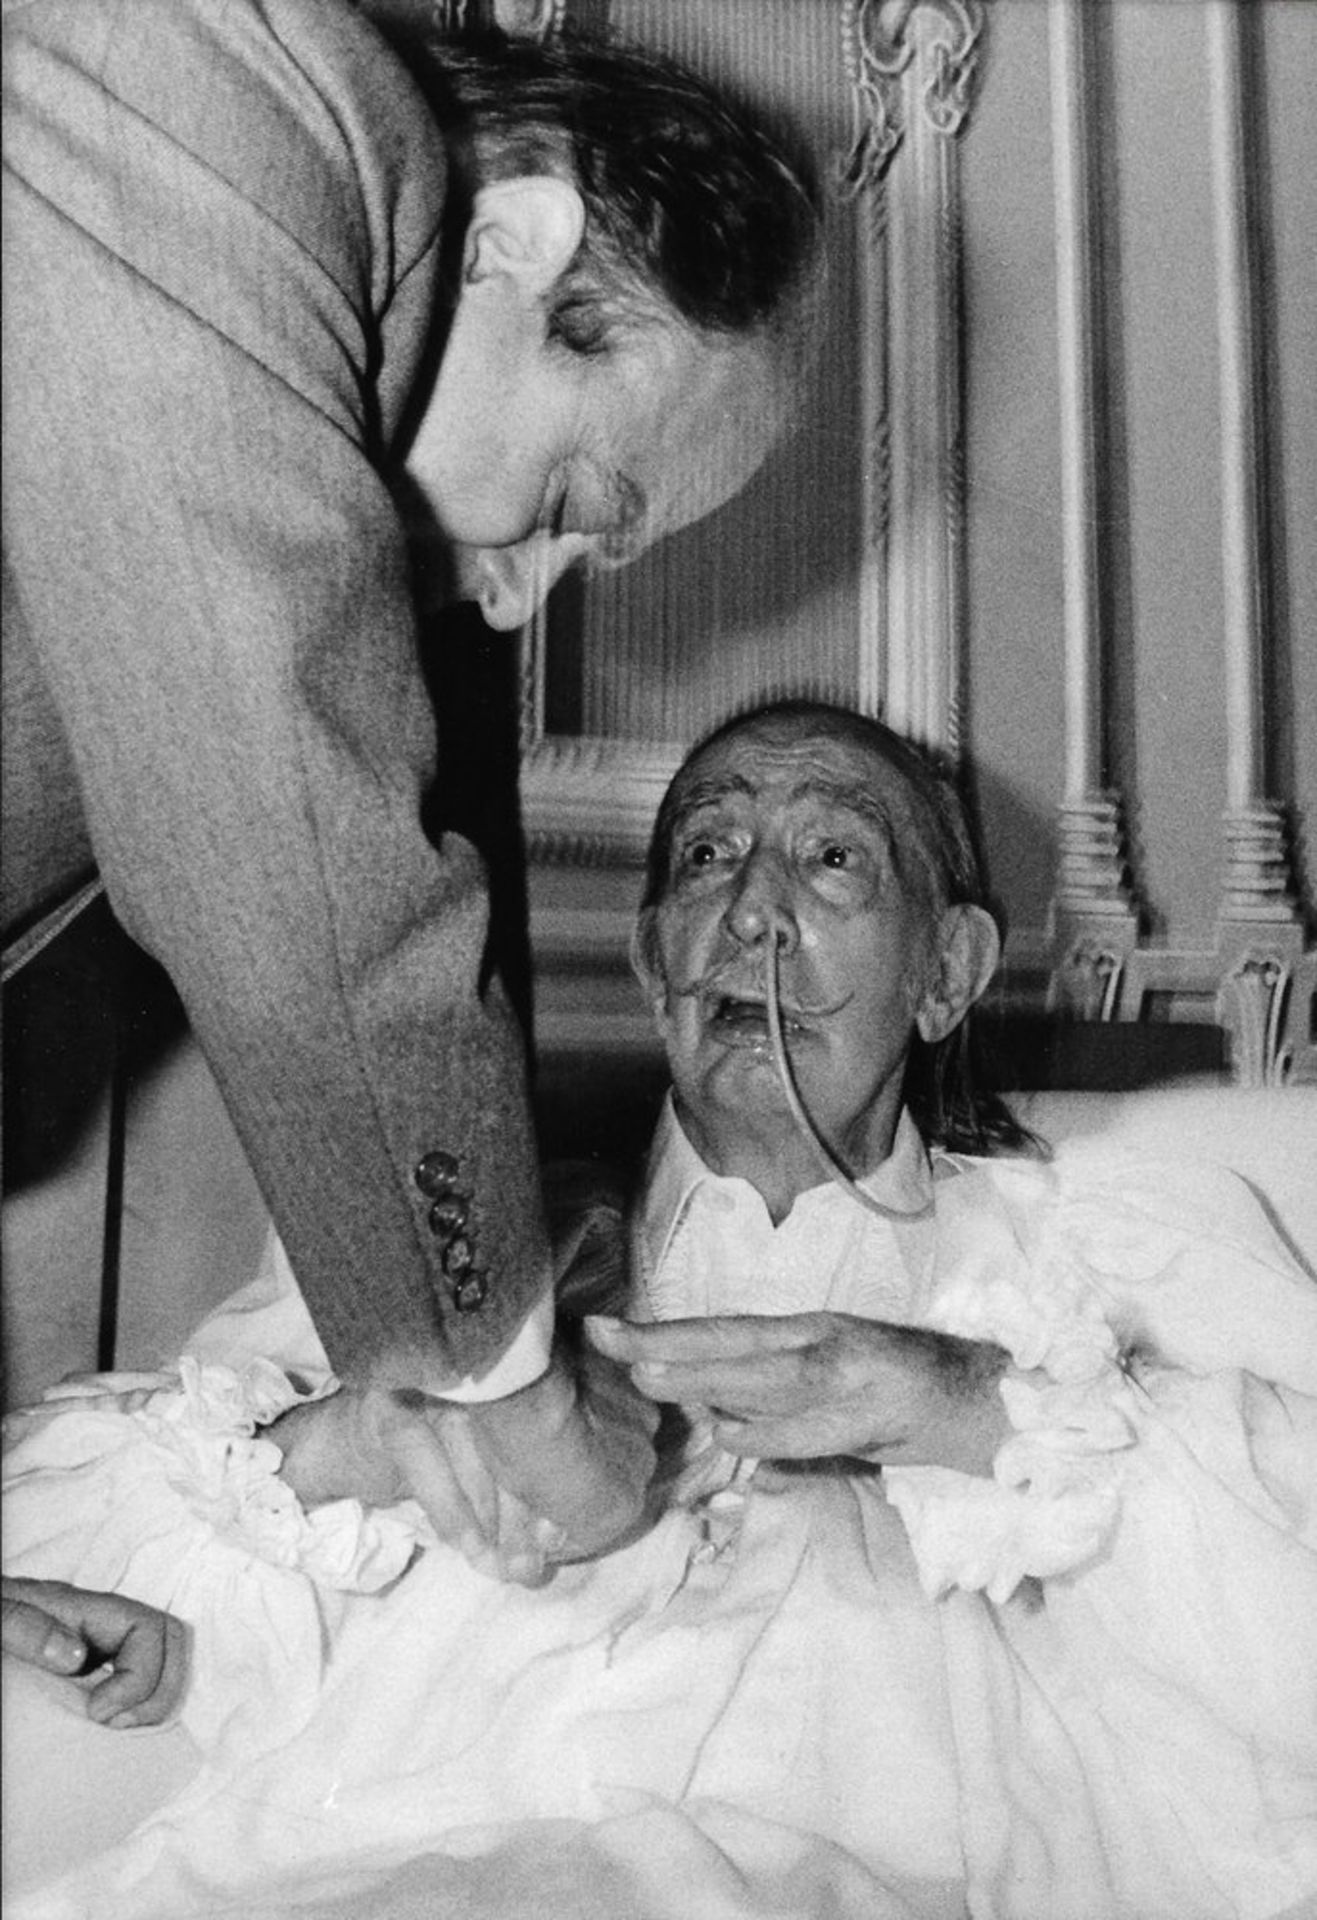 A SET OF 2 VINTAGE PHOTOGRAPHS. - 1) Salvador Dali at the clinic in Barcelona. [...]